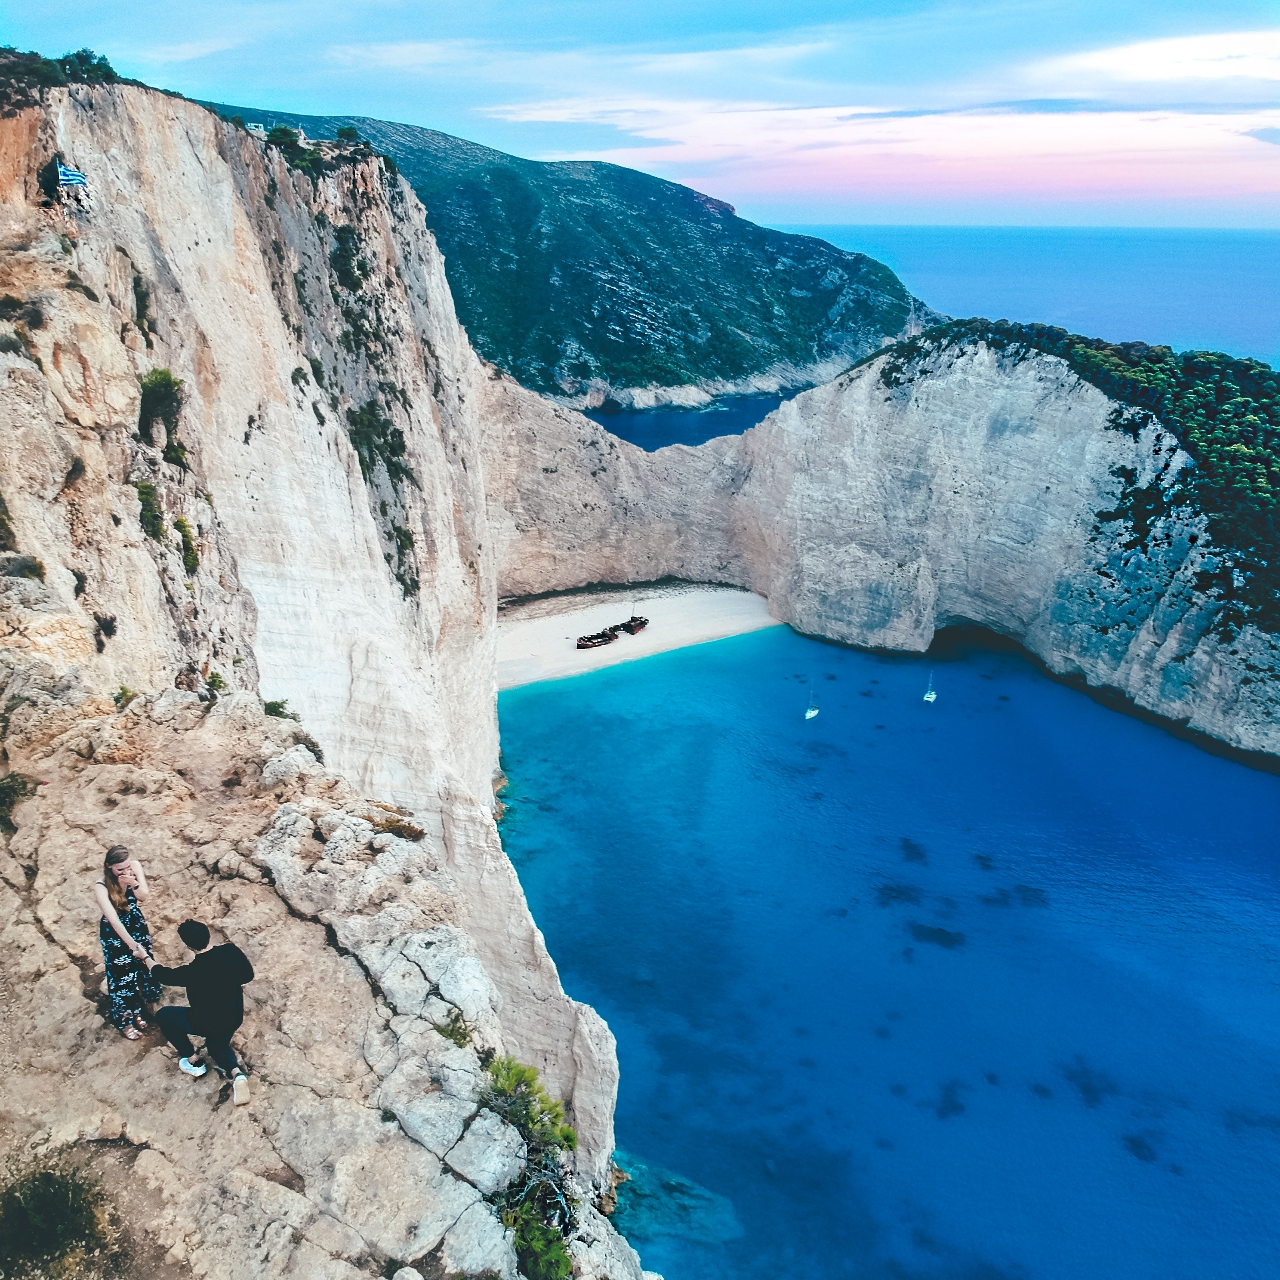 Couple getting engaged at the Shipwreck Beach Viewpoint in Zakynthos (Greece)